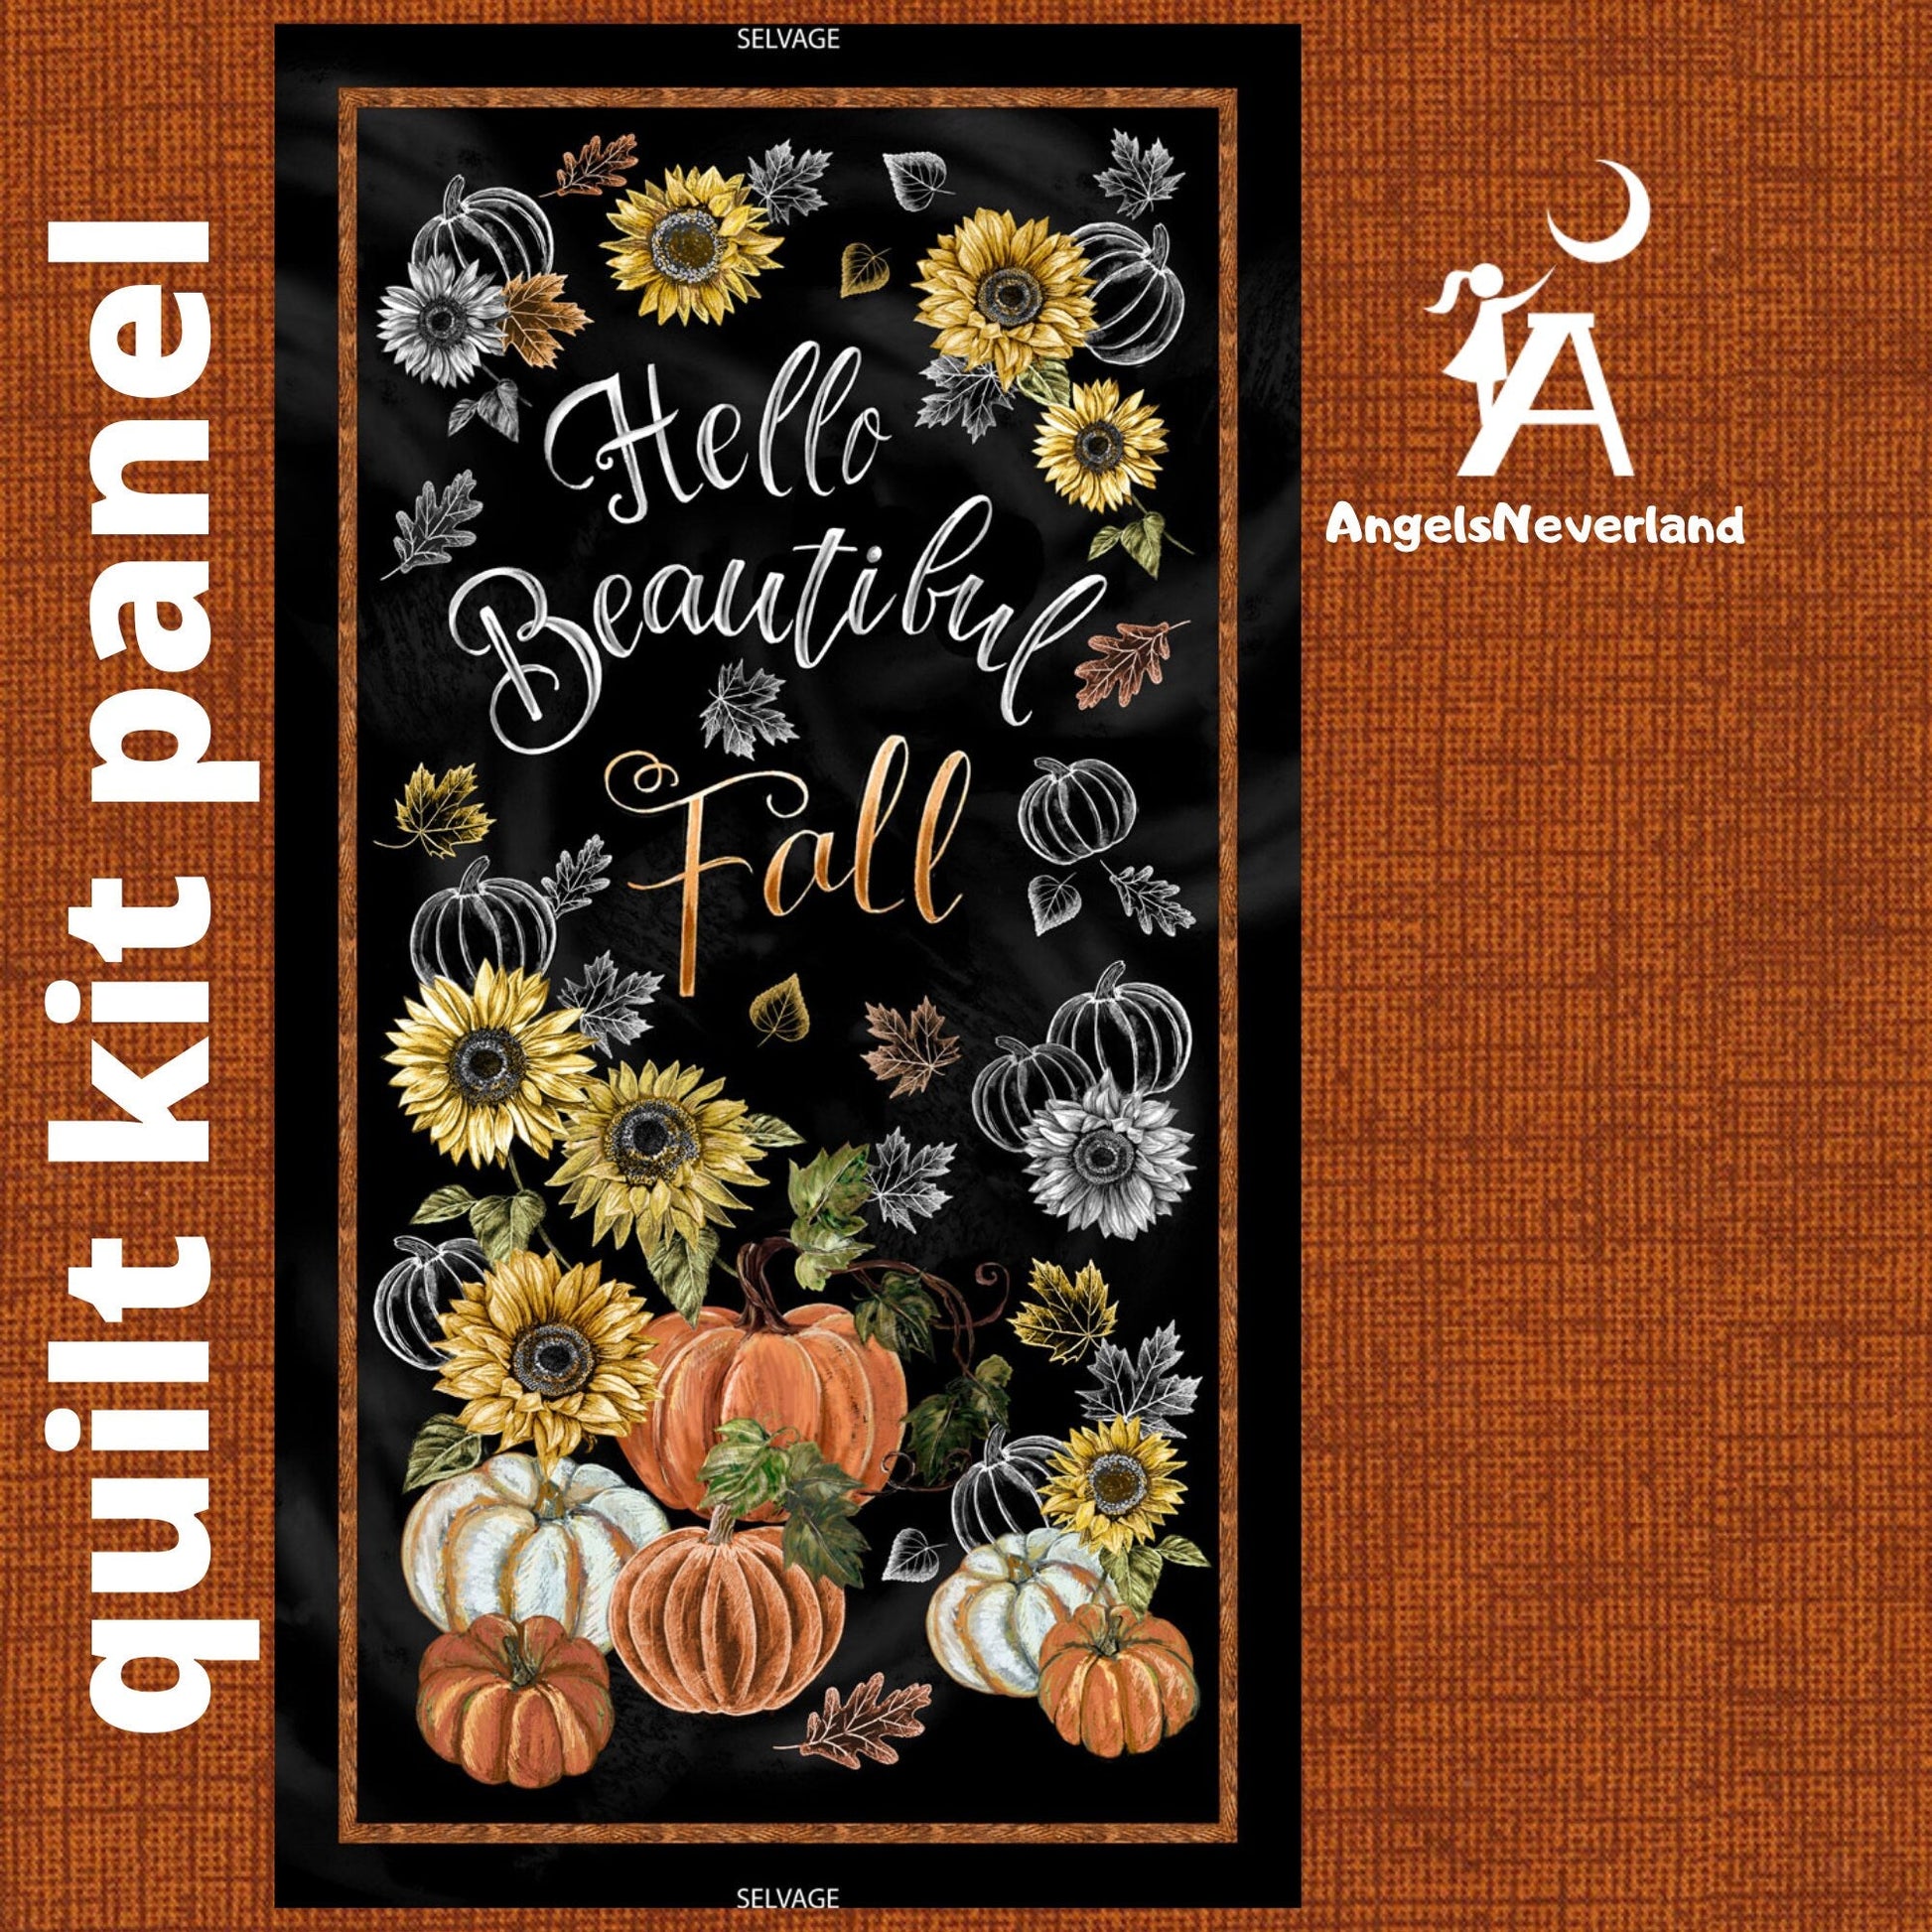 Timeless Treasures Quilt Kit No Backing Hello Beautiful Fall Advanced Beginner QUILT KIT with pattern by Heidi Pridemore, Timeless Treasures Cotton Fabric, Happy Fall Fabric